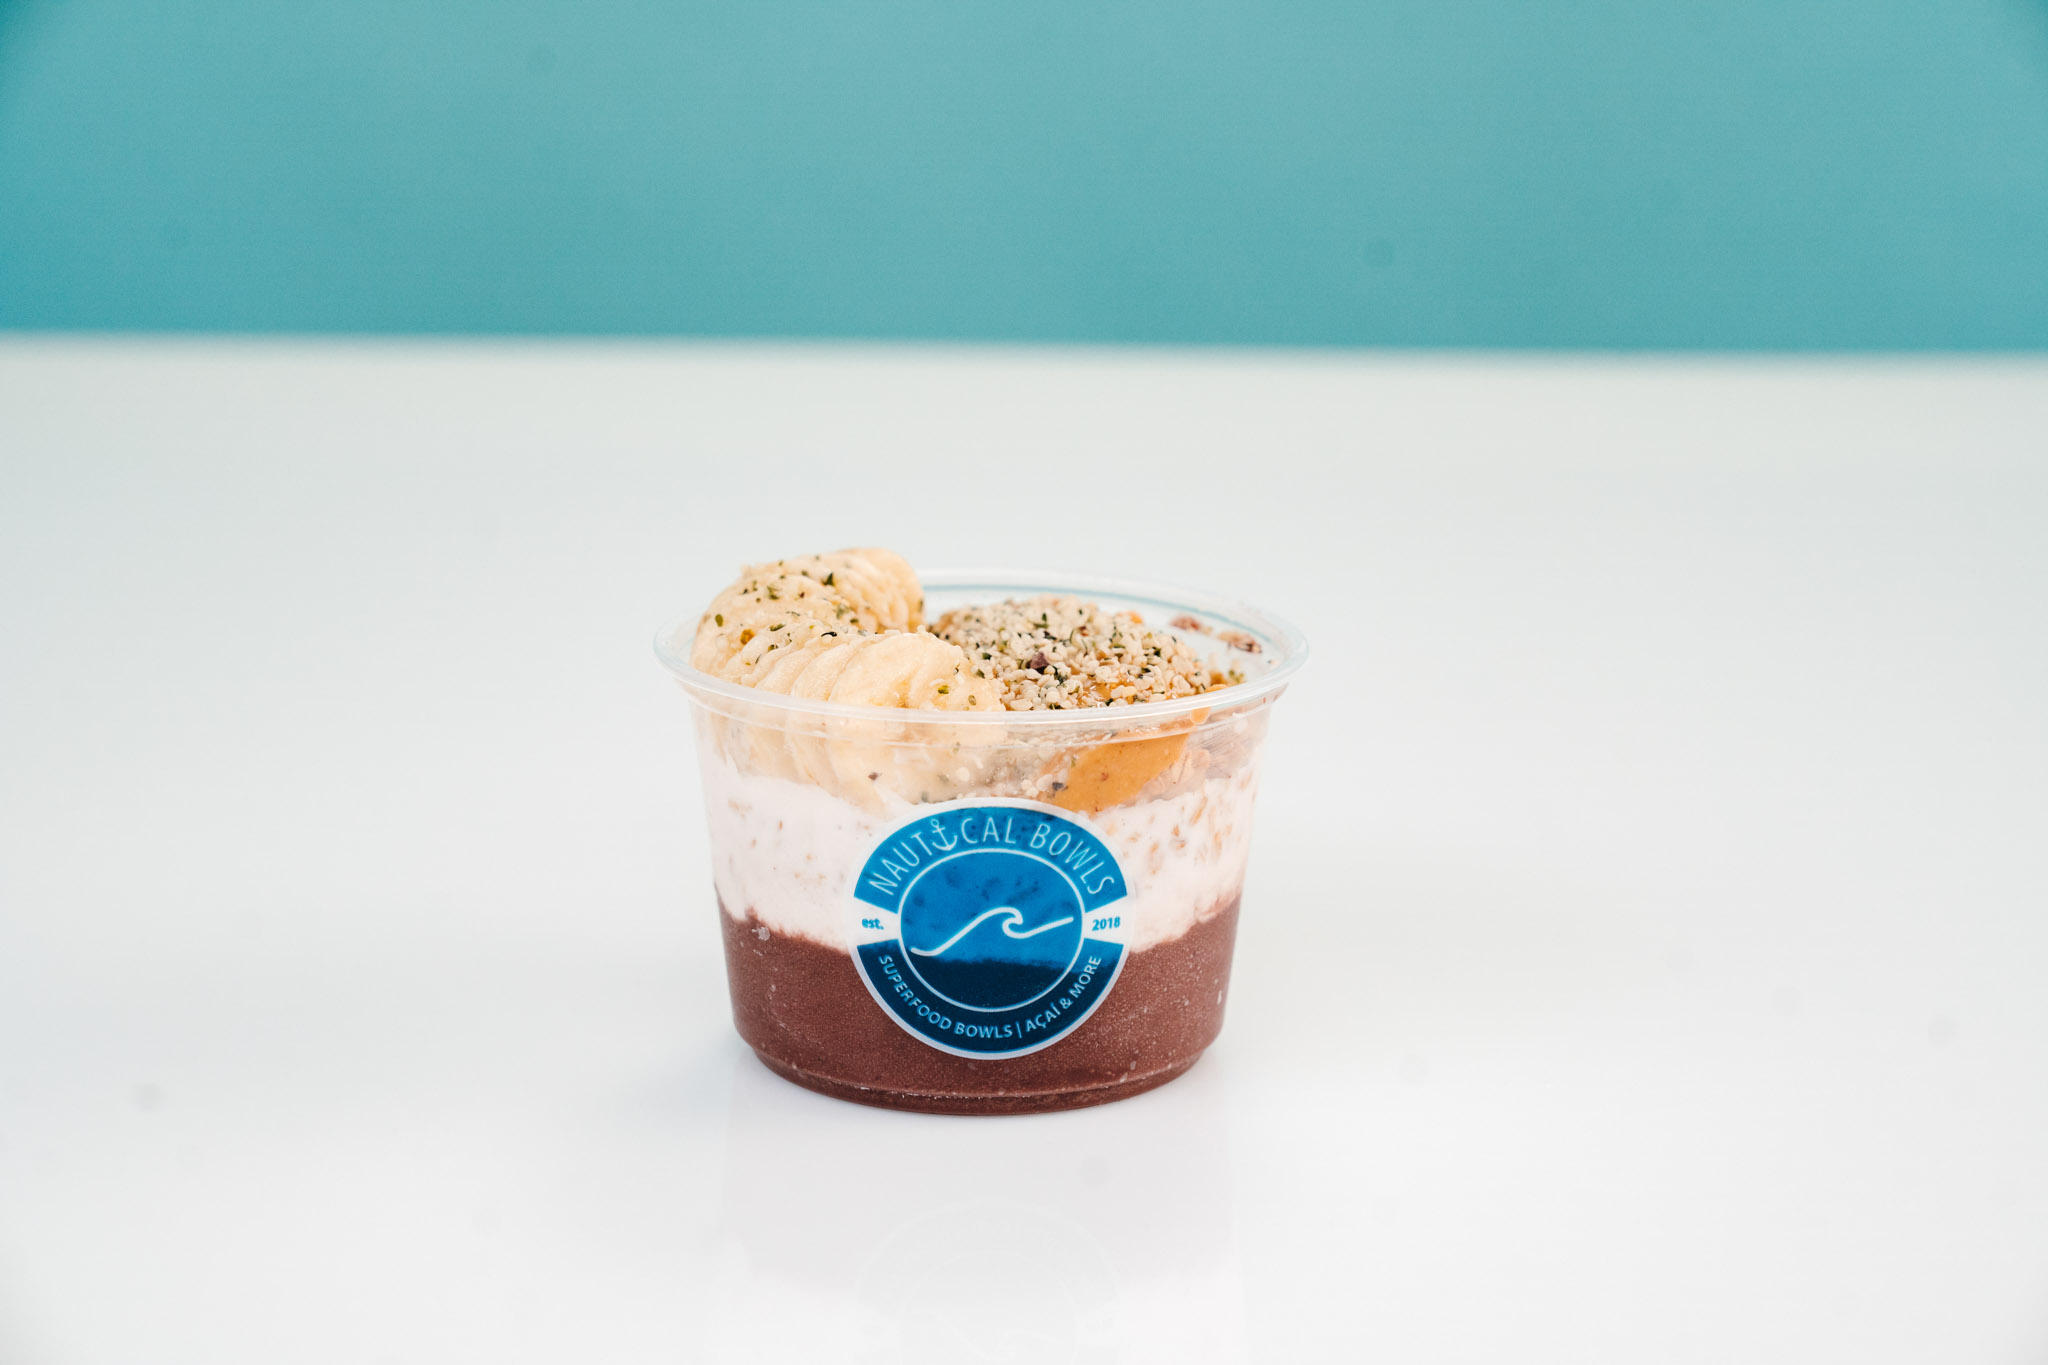 Imagine diving into an acai bowl filled with the freshest fruits, organic granola, & a medley of natural toppings like cacao nibs, hemp seeds, & honey. It's the perfect vegan dessert!